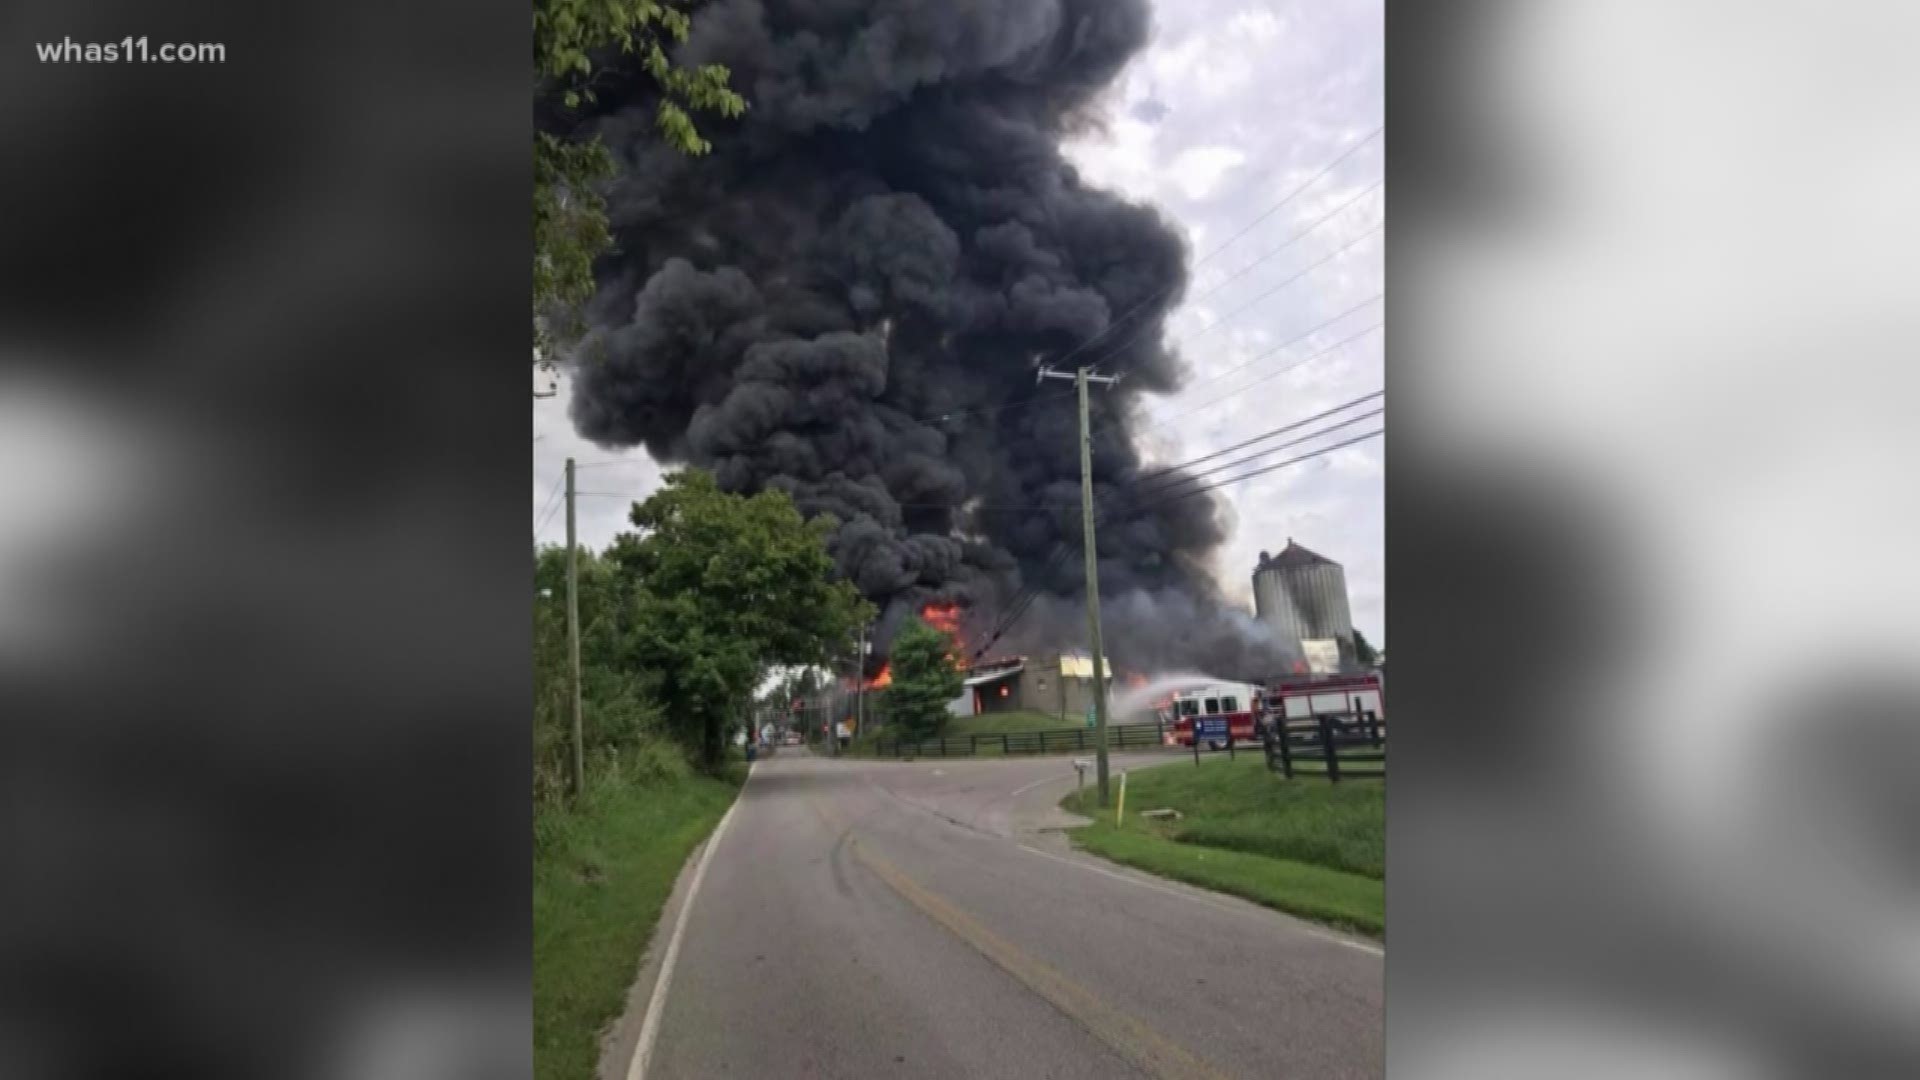 Major fire at abandoned business in Shelby County, Ky. 